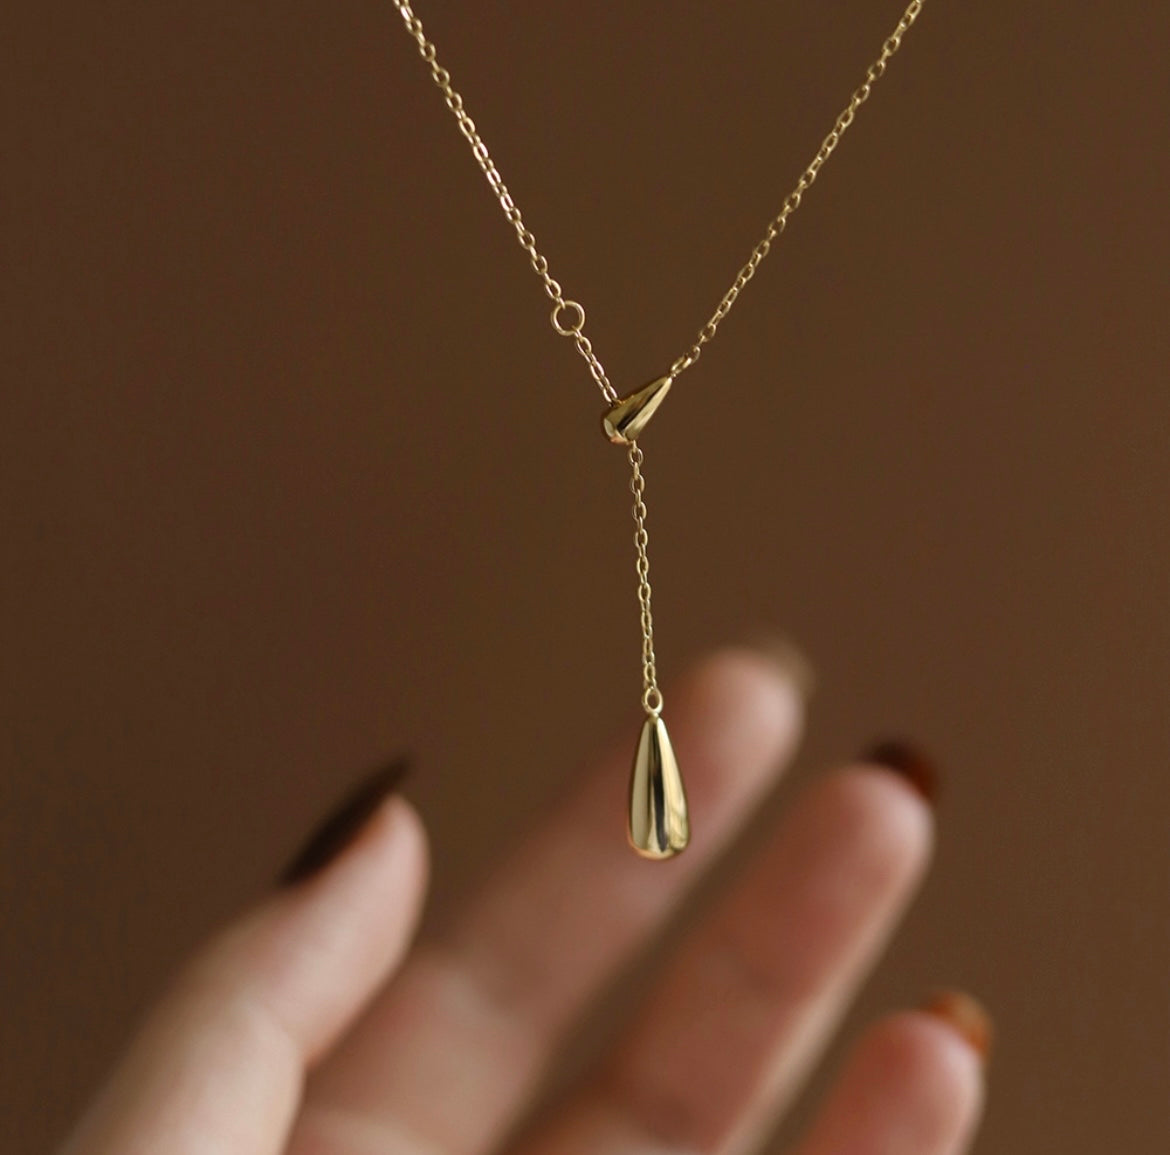 Water droplets necklace